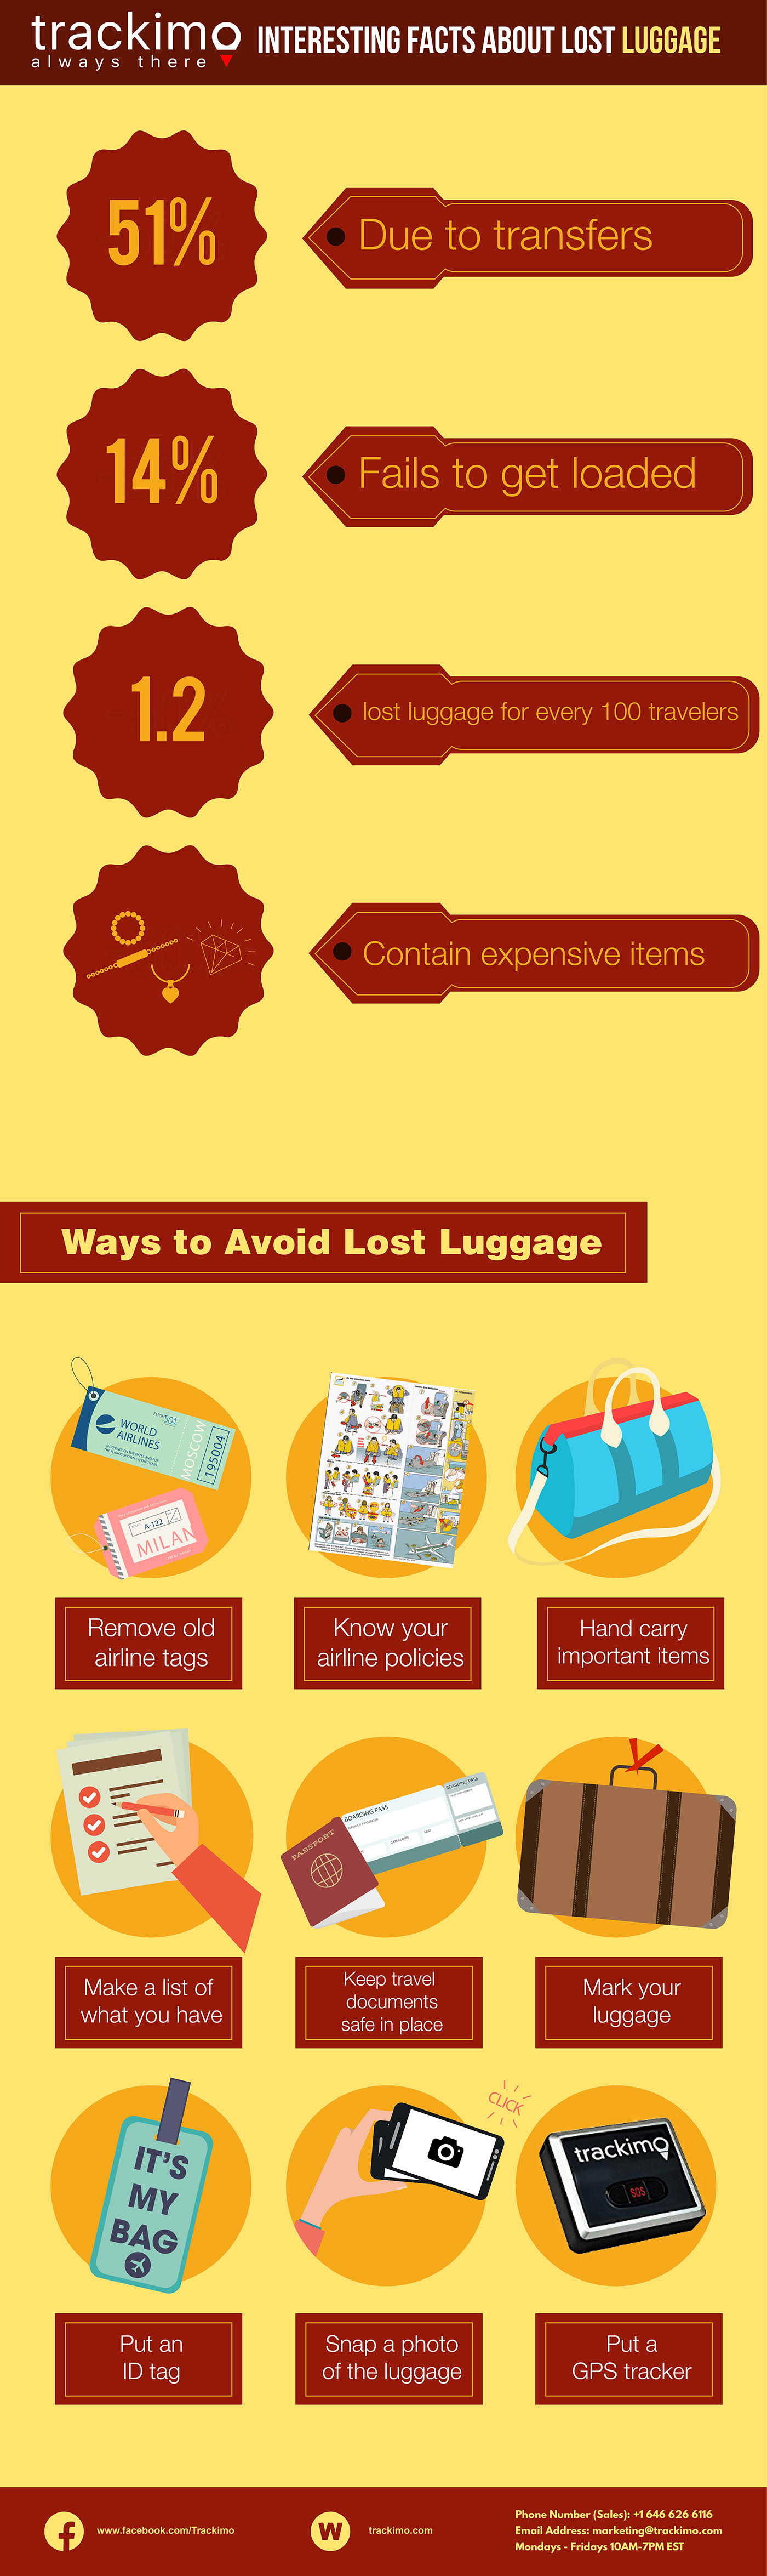 Lost luggage tips TRAVEL TIPS baggage tracking Lost luggage facts